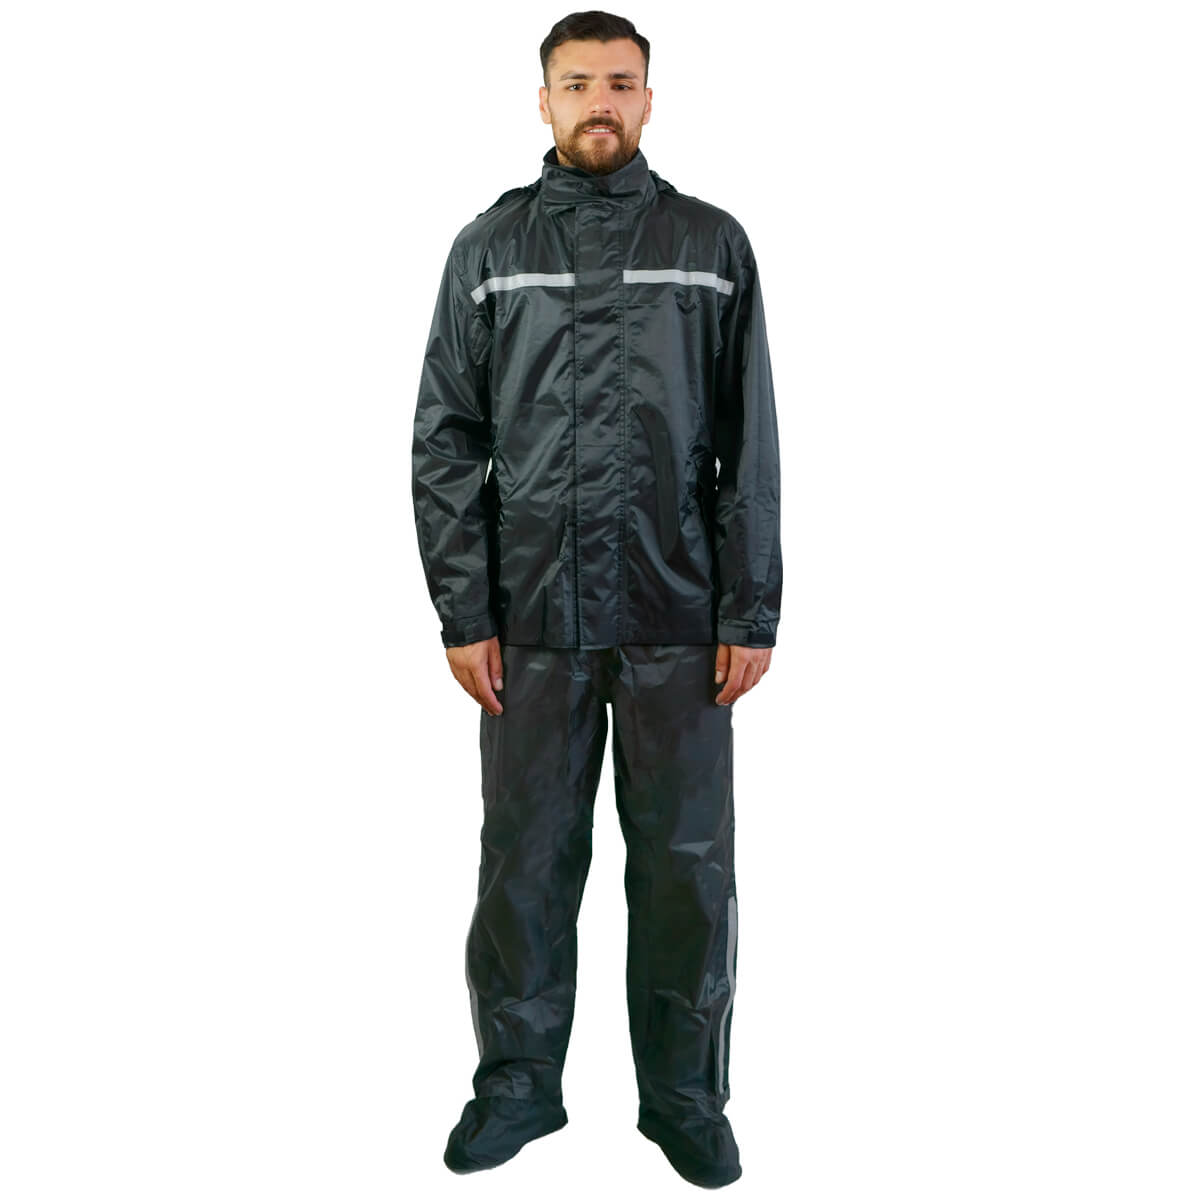 Rainwear set in waterproof synthetic fabric jacket, trousers and boot covers.